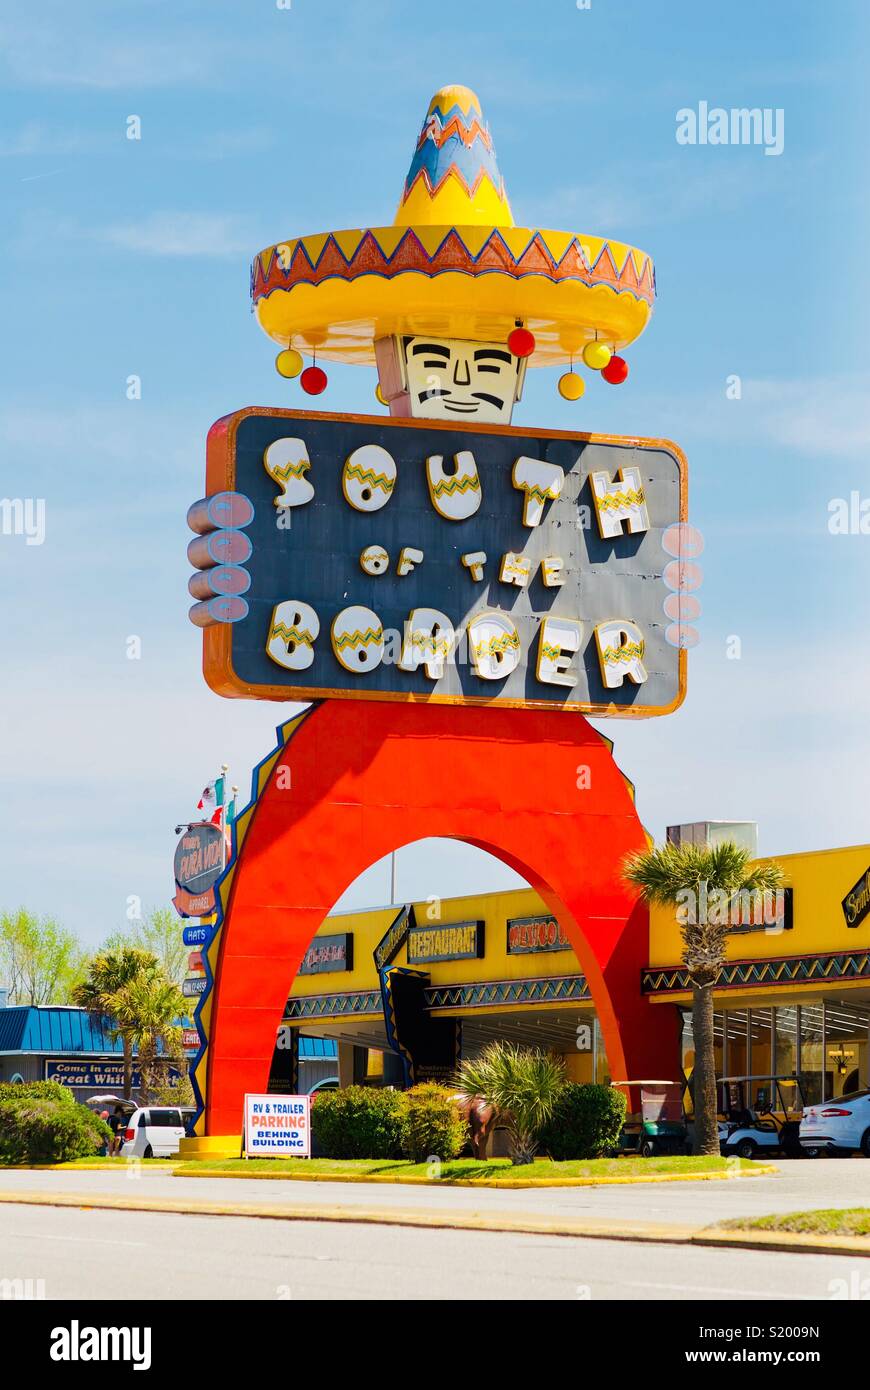 This huge neon sign advertises the “South of the Border” tourist attraction in South Carolina just south of the North Carolina state line in the United States along Interstate 95. Stock Photo